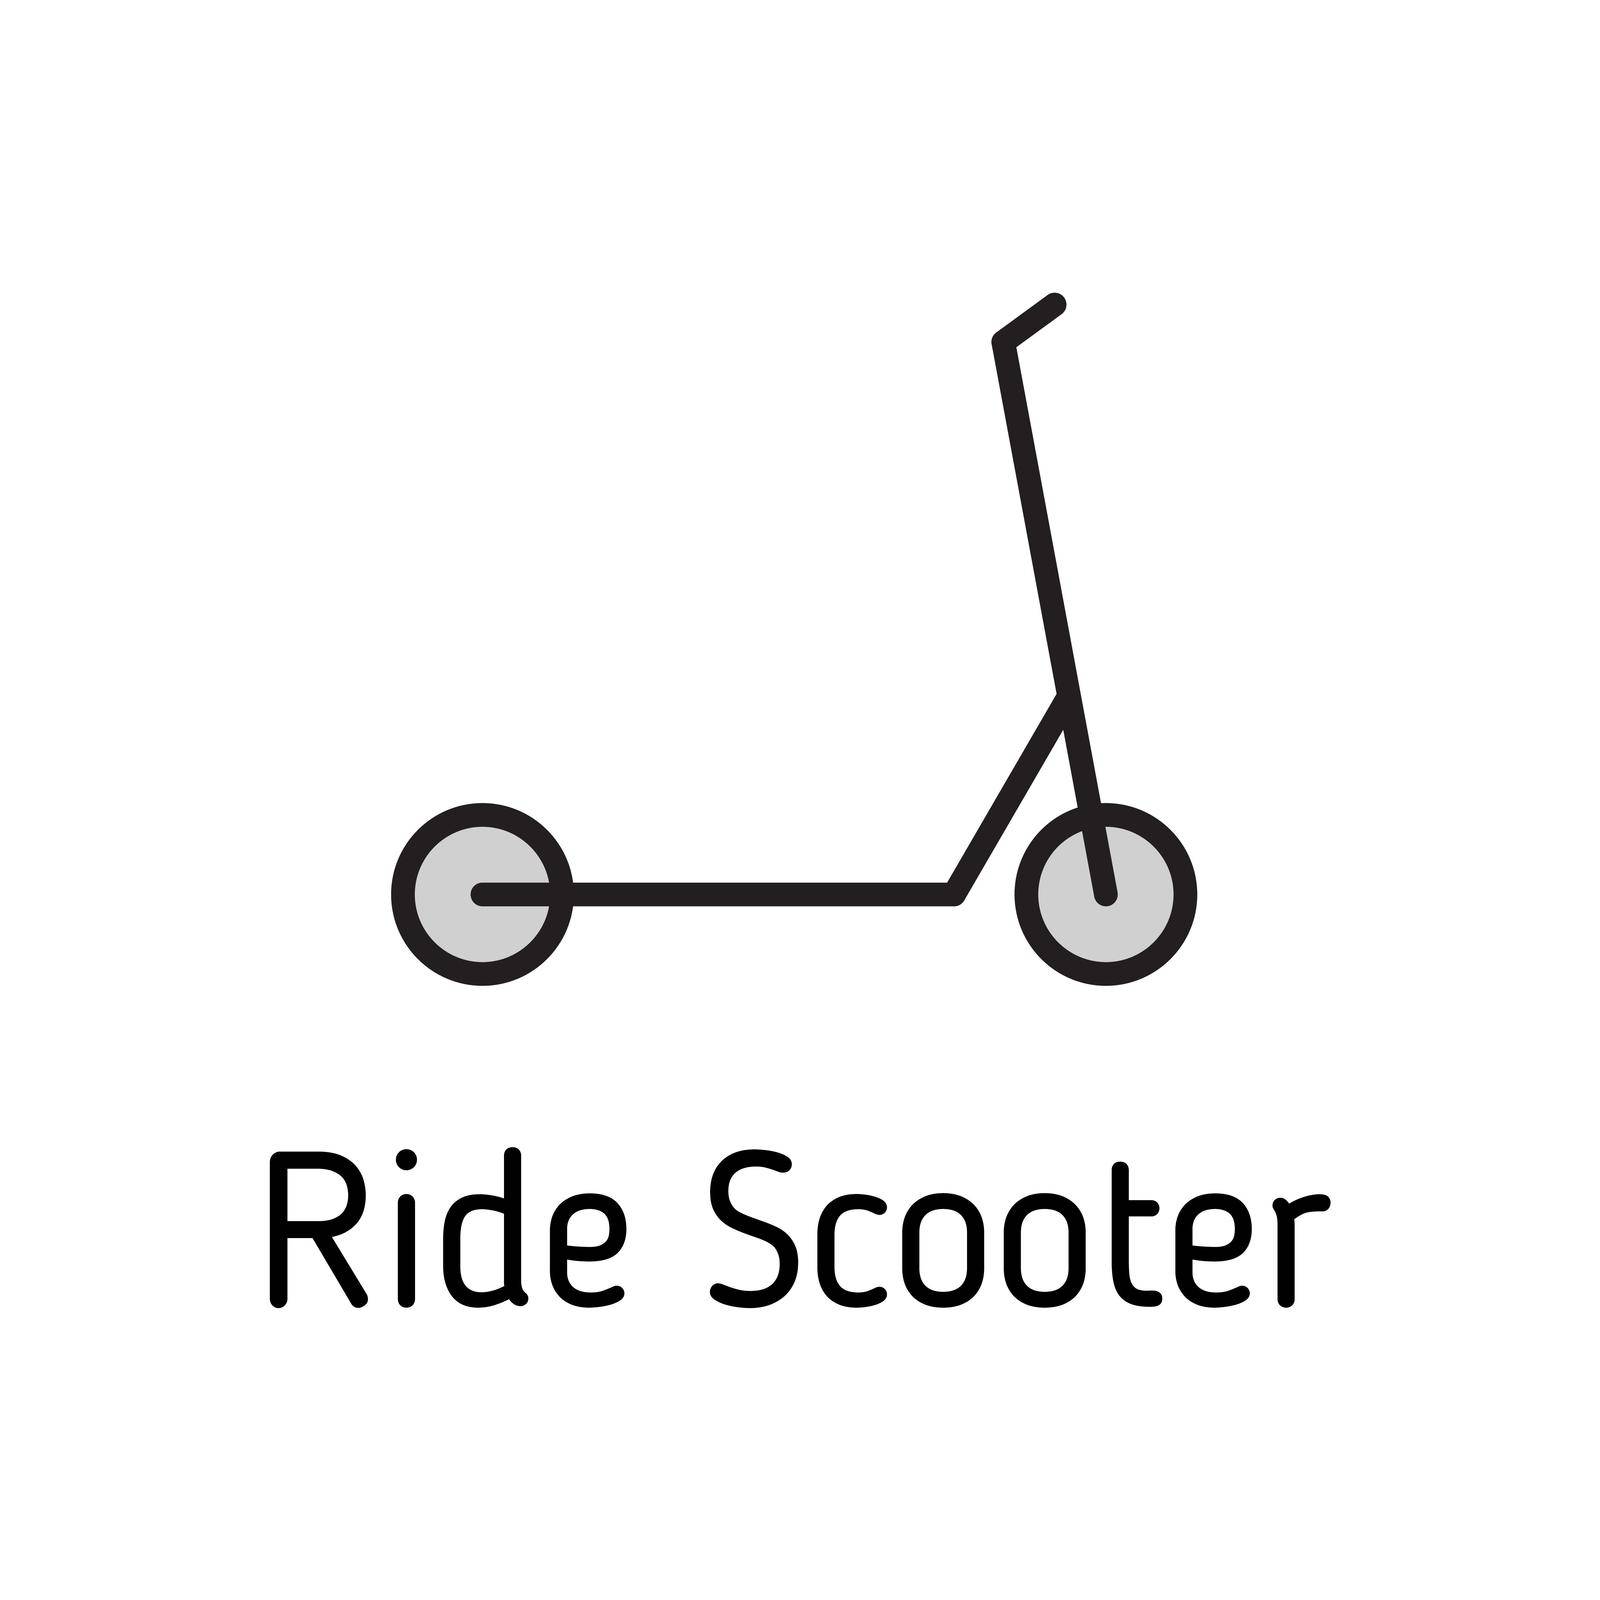 ride scooter color filled vector icon isolated on white background. zero waste eco concept. ride scooter outline icon for web, mobile and ui design.